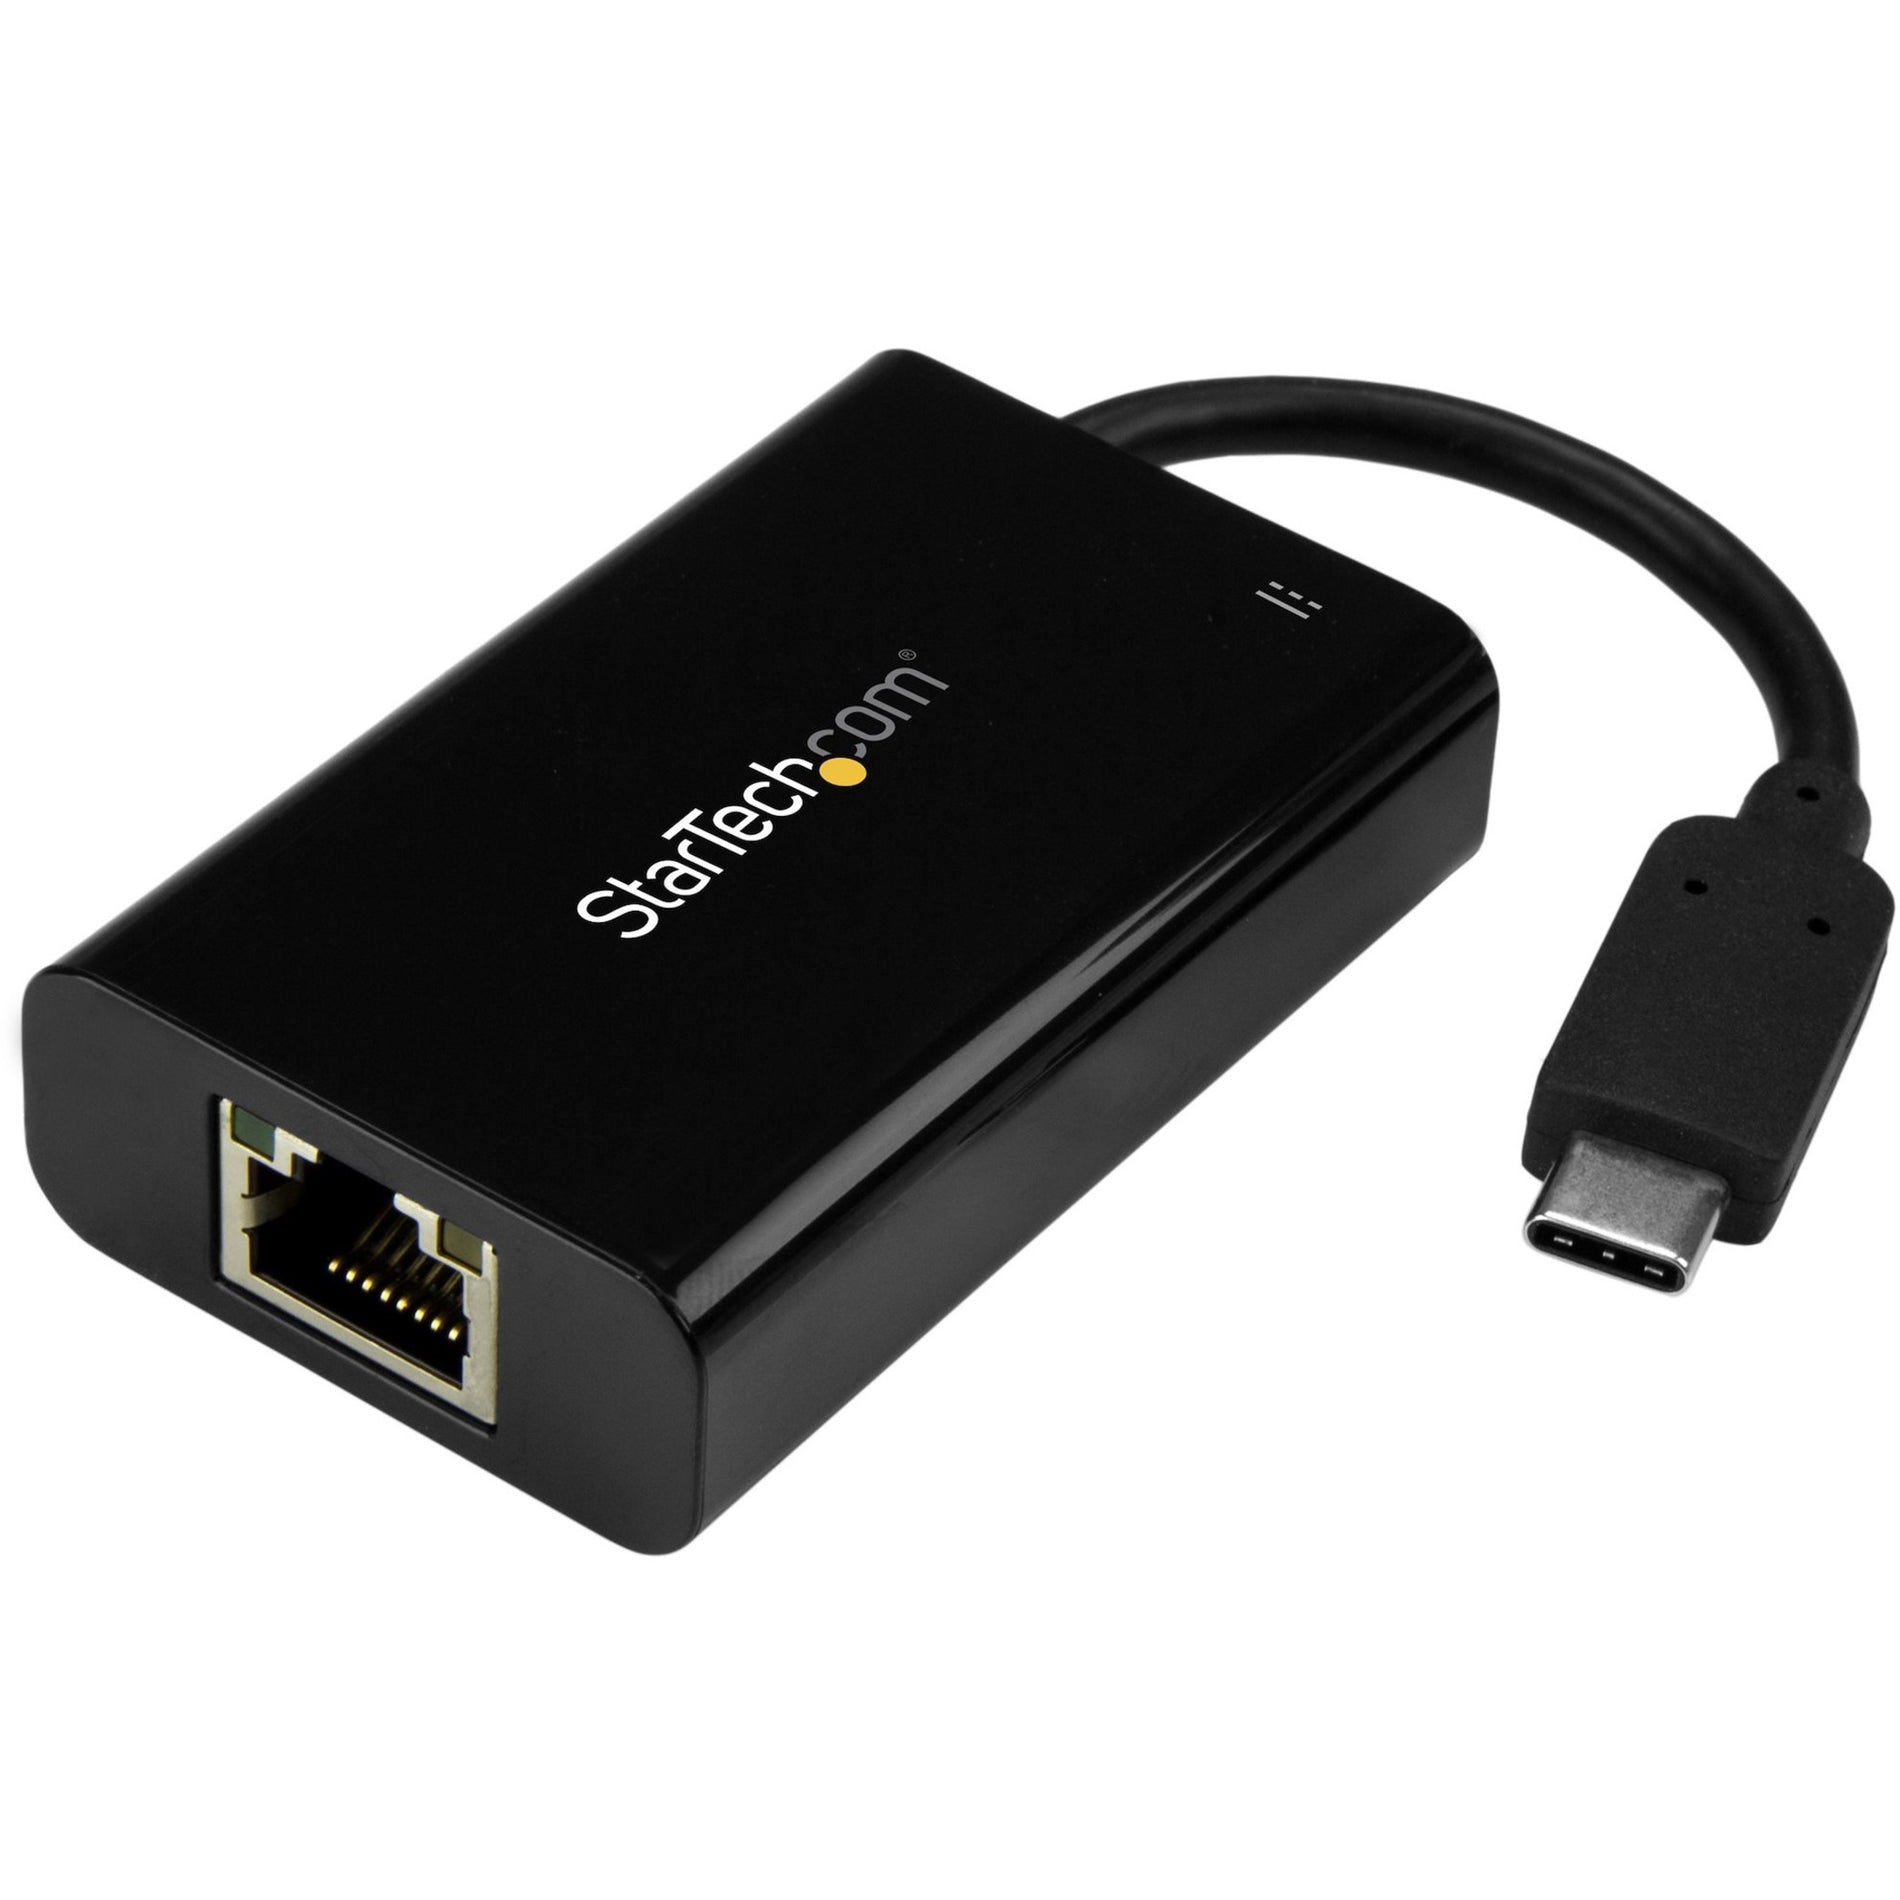 StarTech.com US1GC30PD USB-C to Ethernet Adapter with PD Charging, Gigabit Ethernet Network Adapter